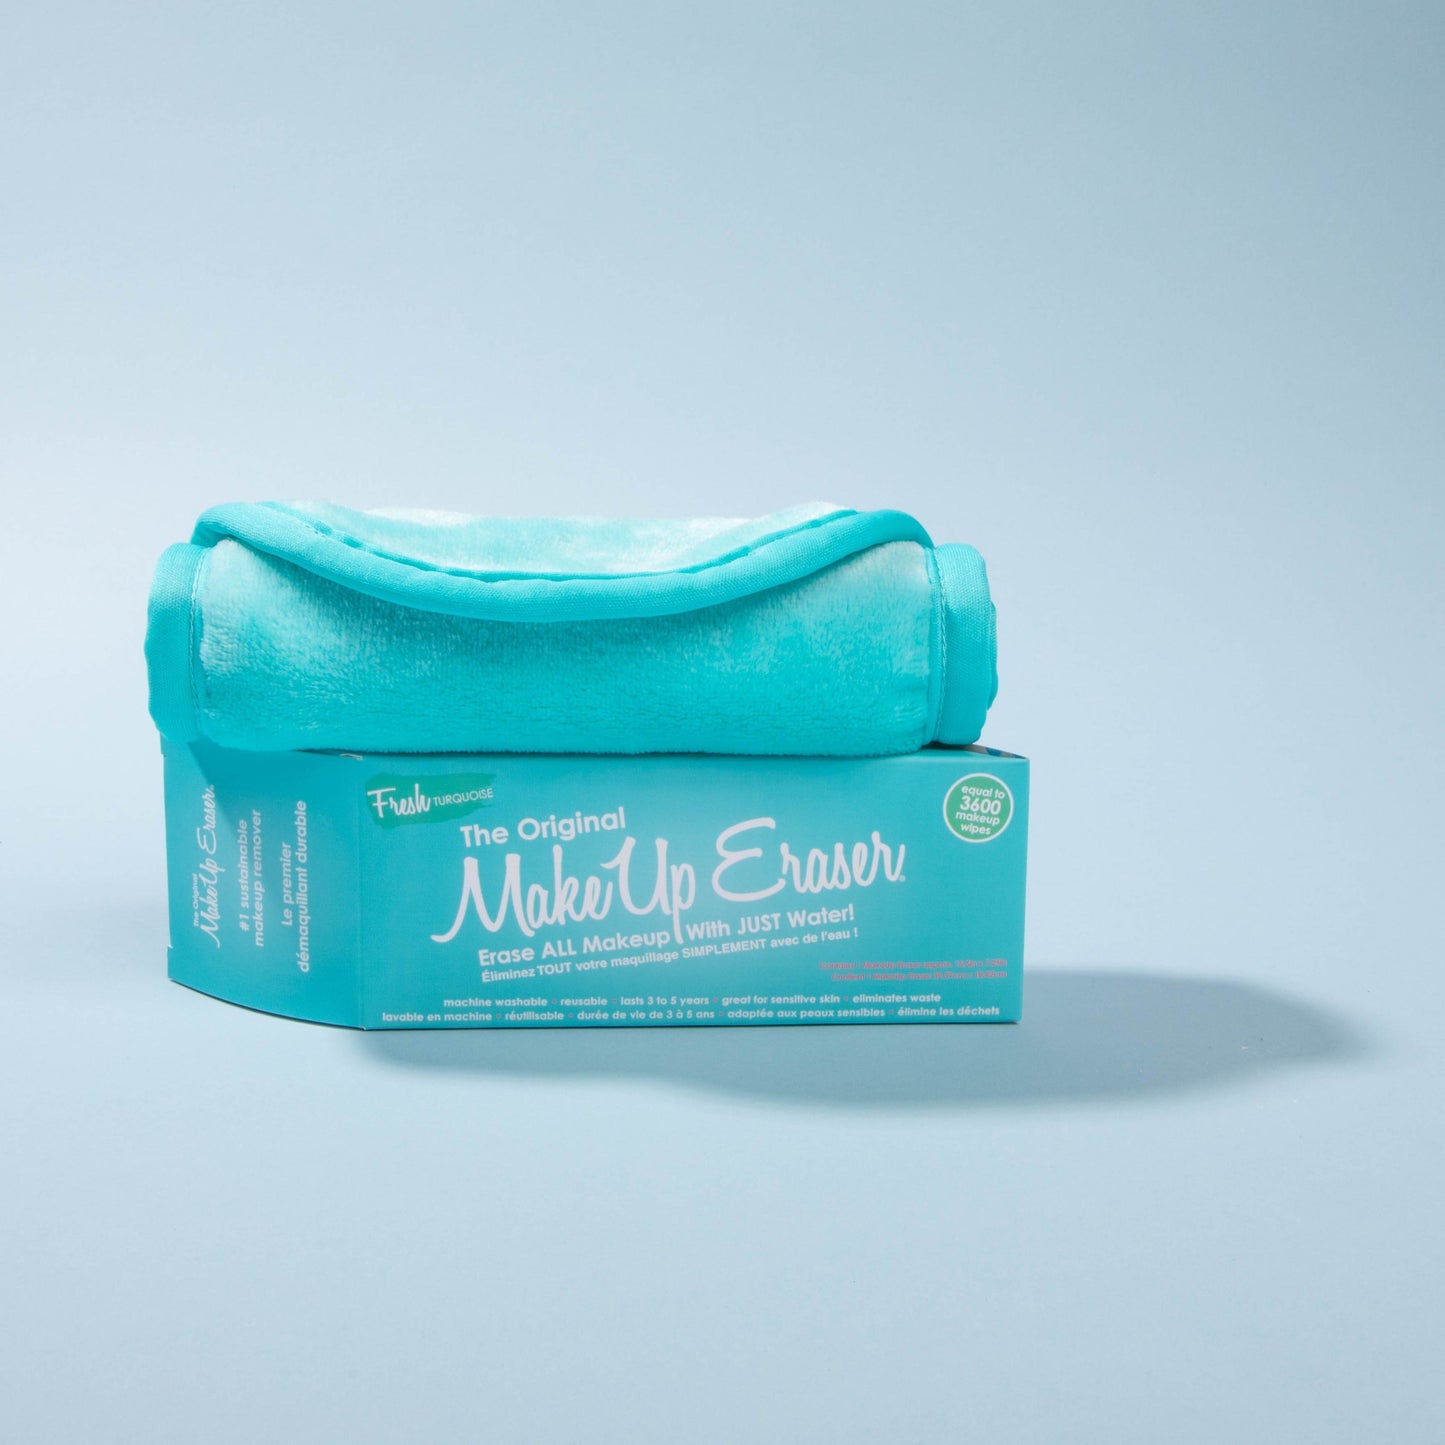 Rolled up Fresh Turquoise MakeUp Eraser on top of packaging.